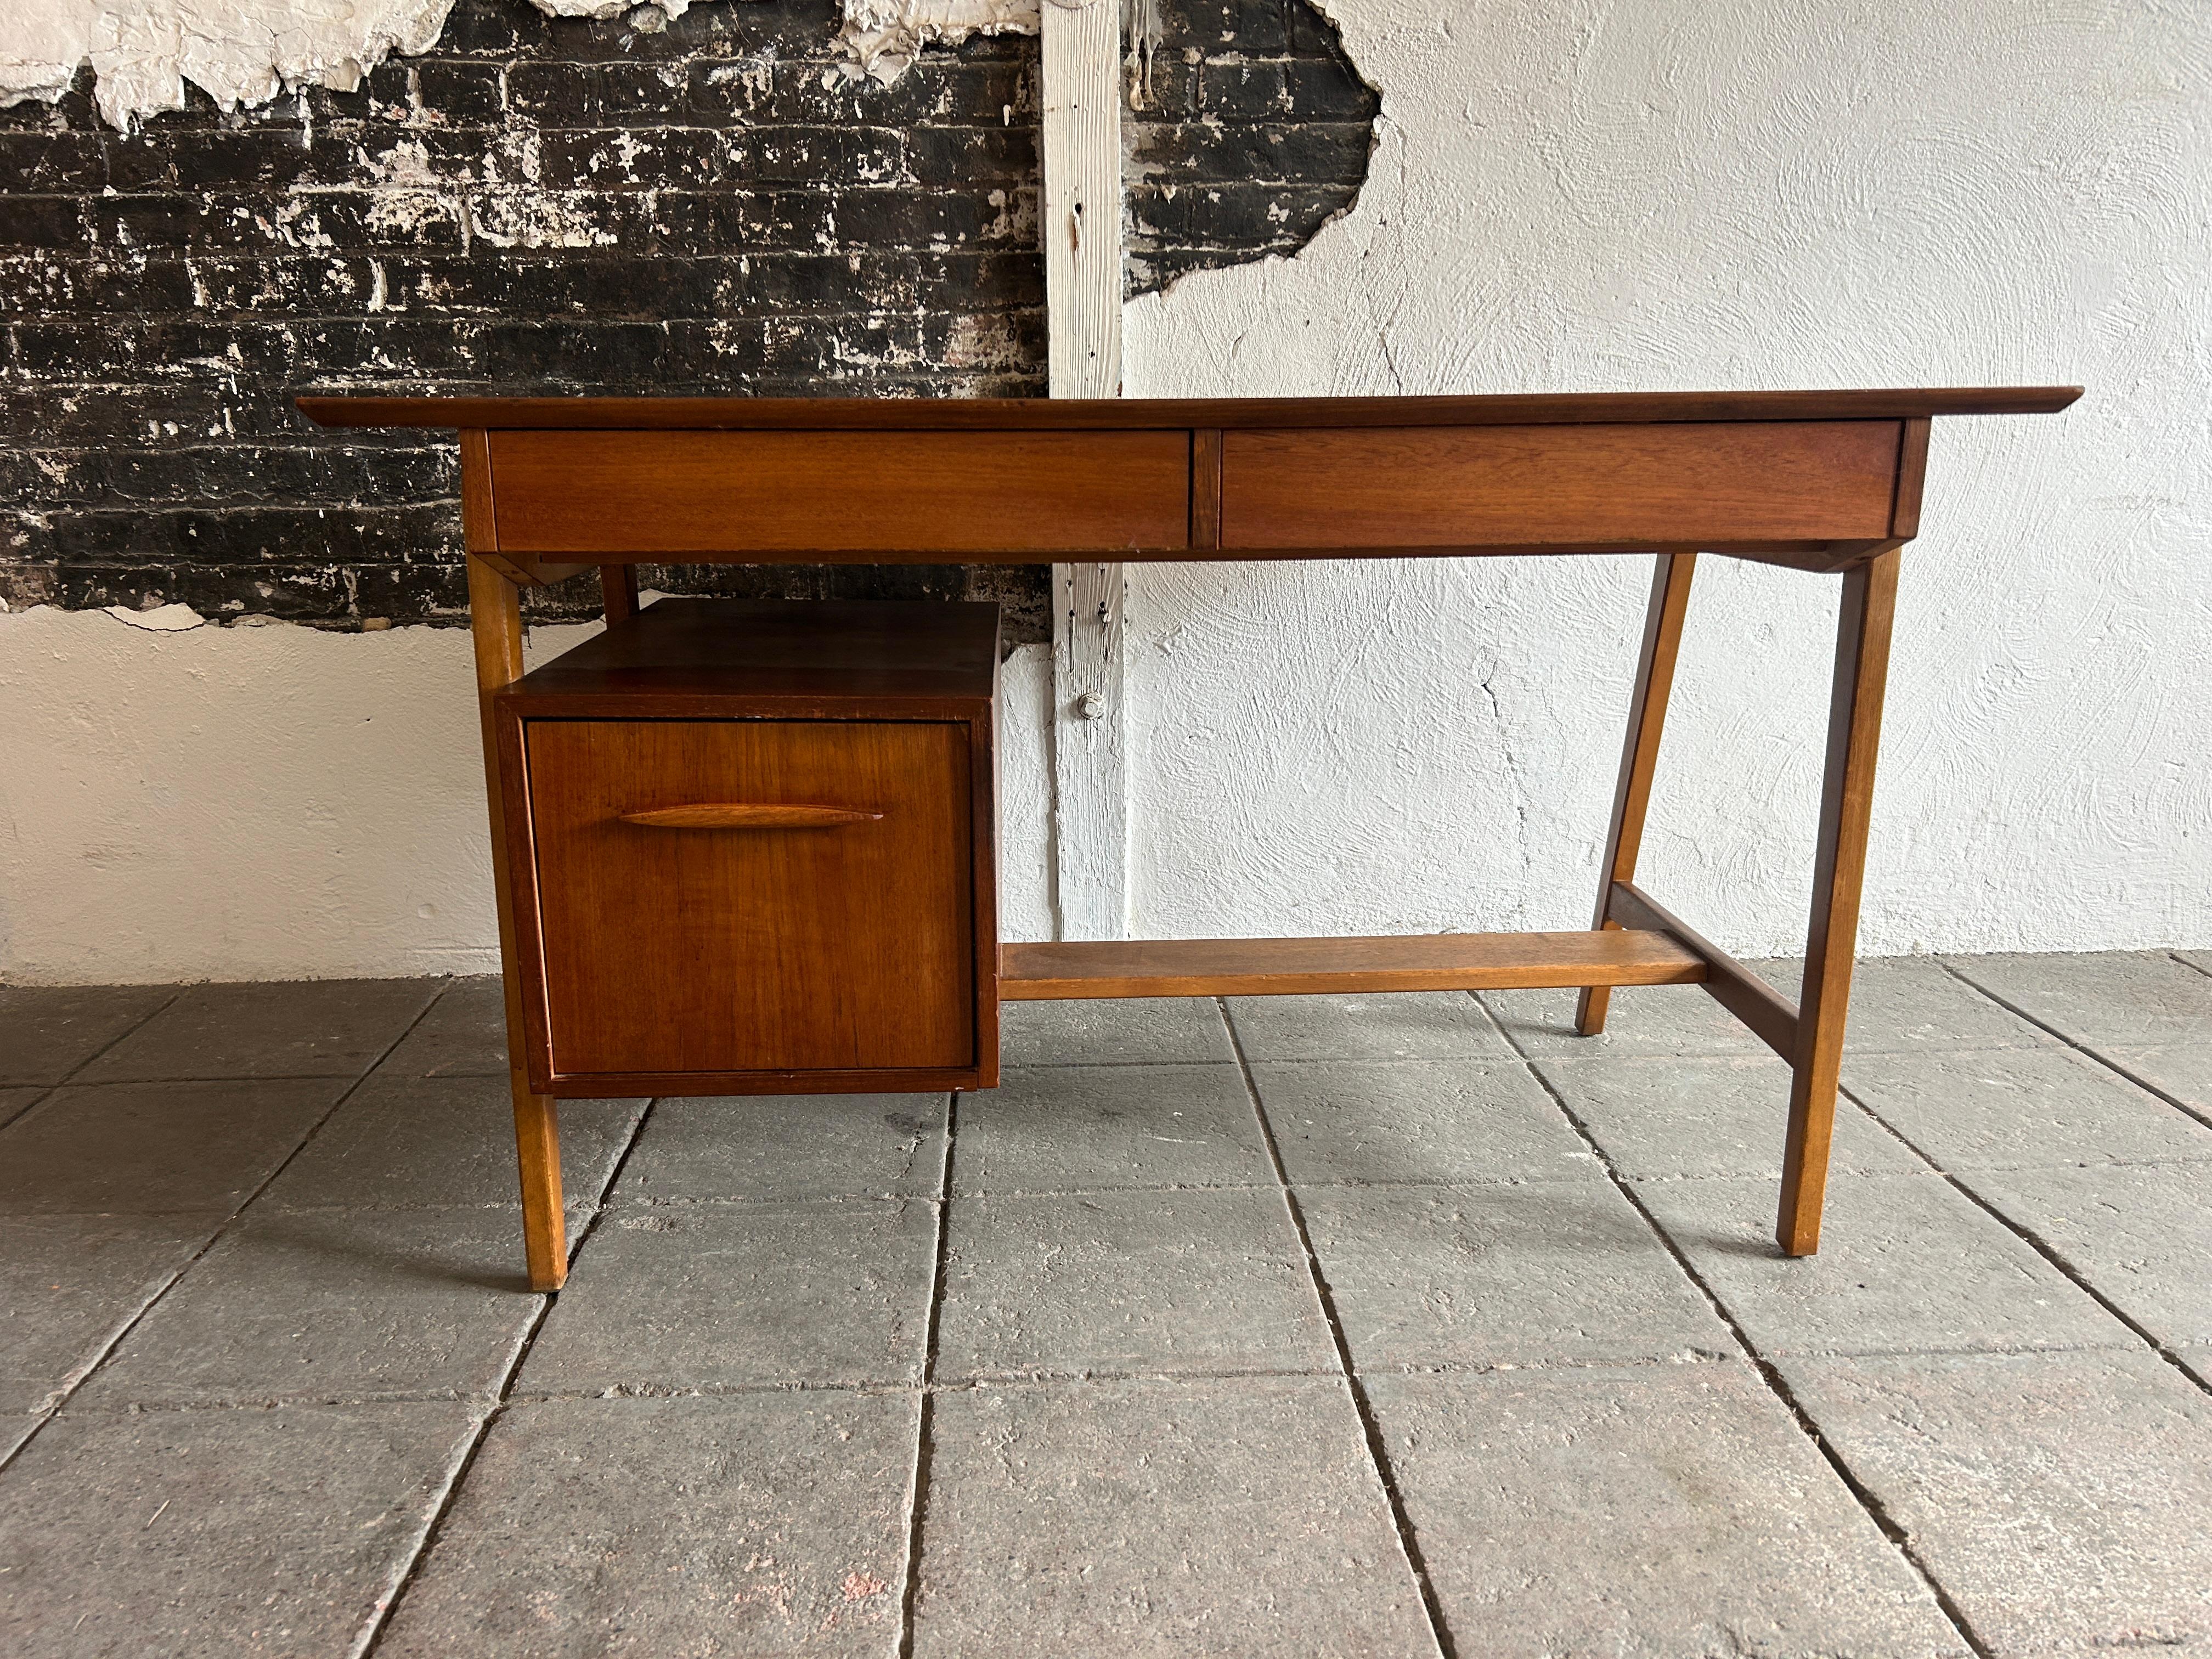 Mid century danish modern teak desk with 3 drawers And lower brace. This danish desk has (2) upper drawers and (1) lower deep file drawer. The top has a beautiful teak wood grain with the legs being a lighter oak wood as well as the lower brace.